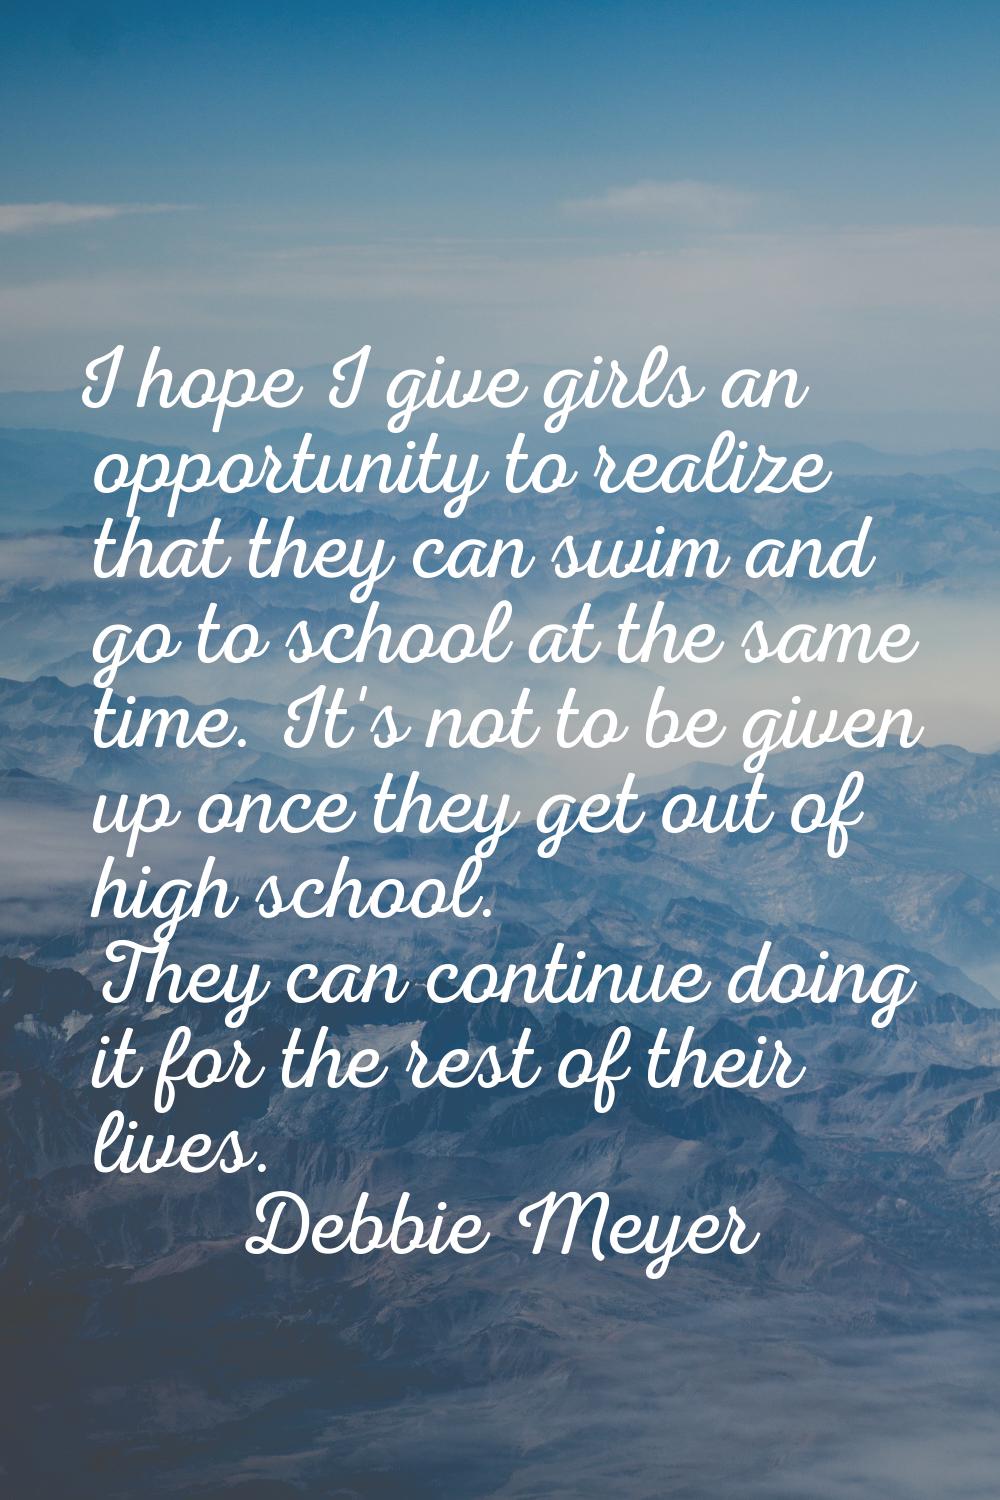 I hope I give girls an opportunity to realize that they can swim and go to school at the same time.